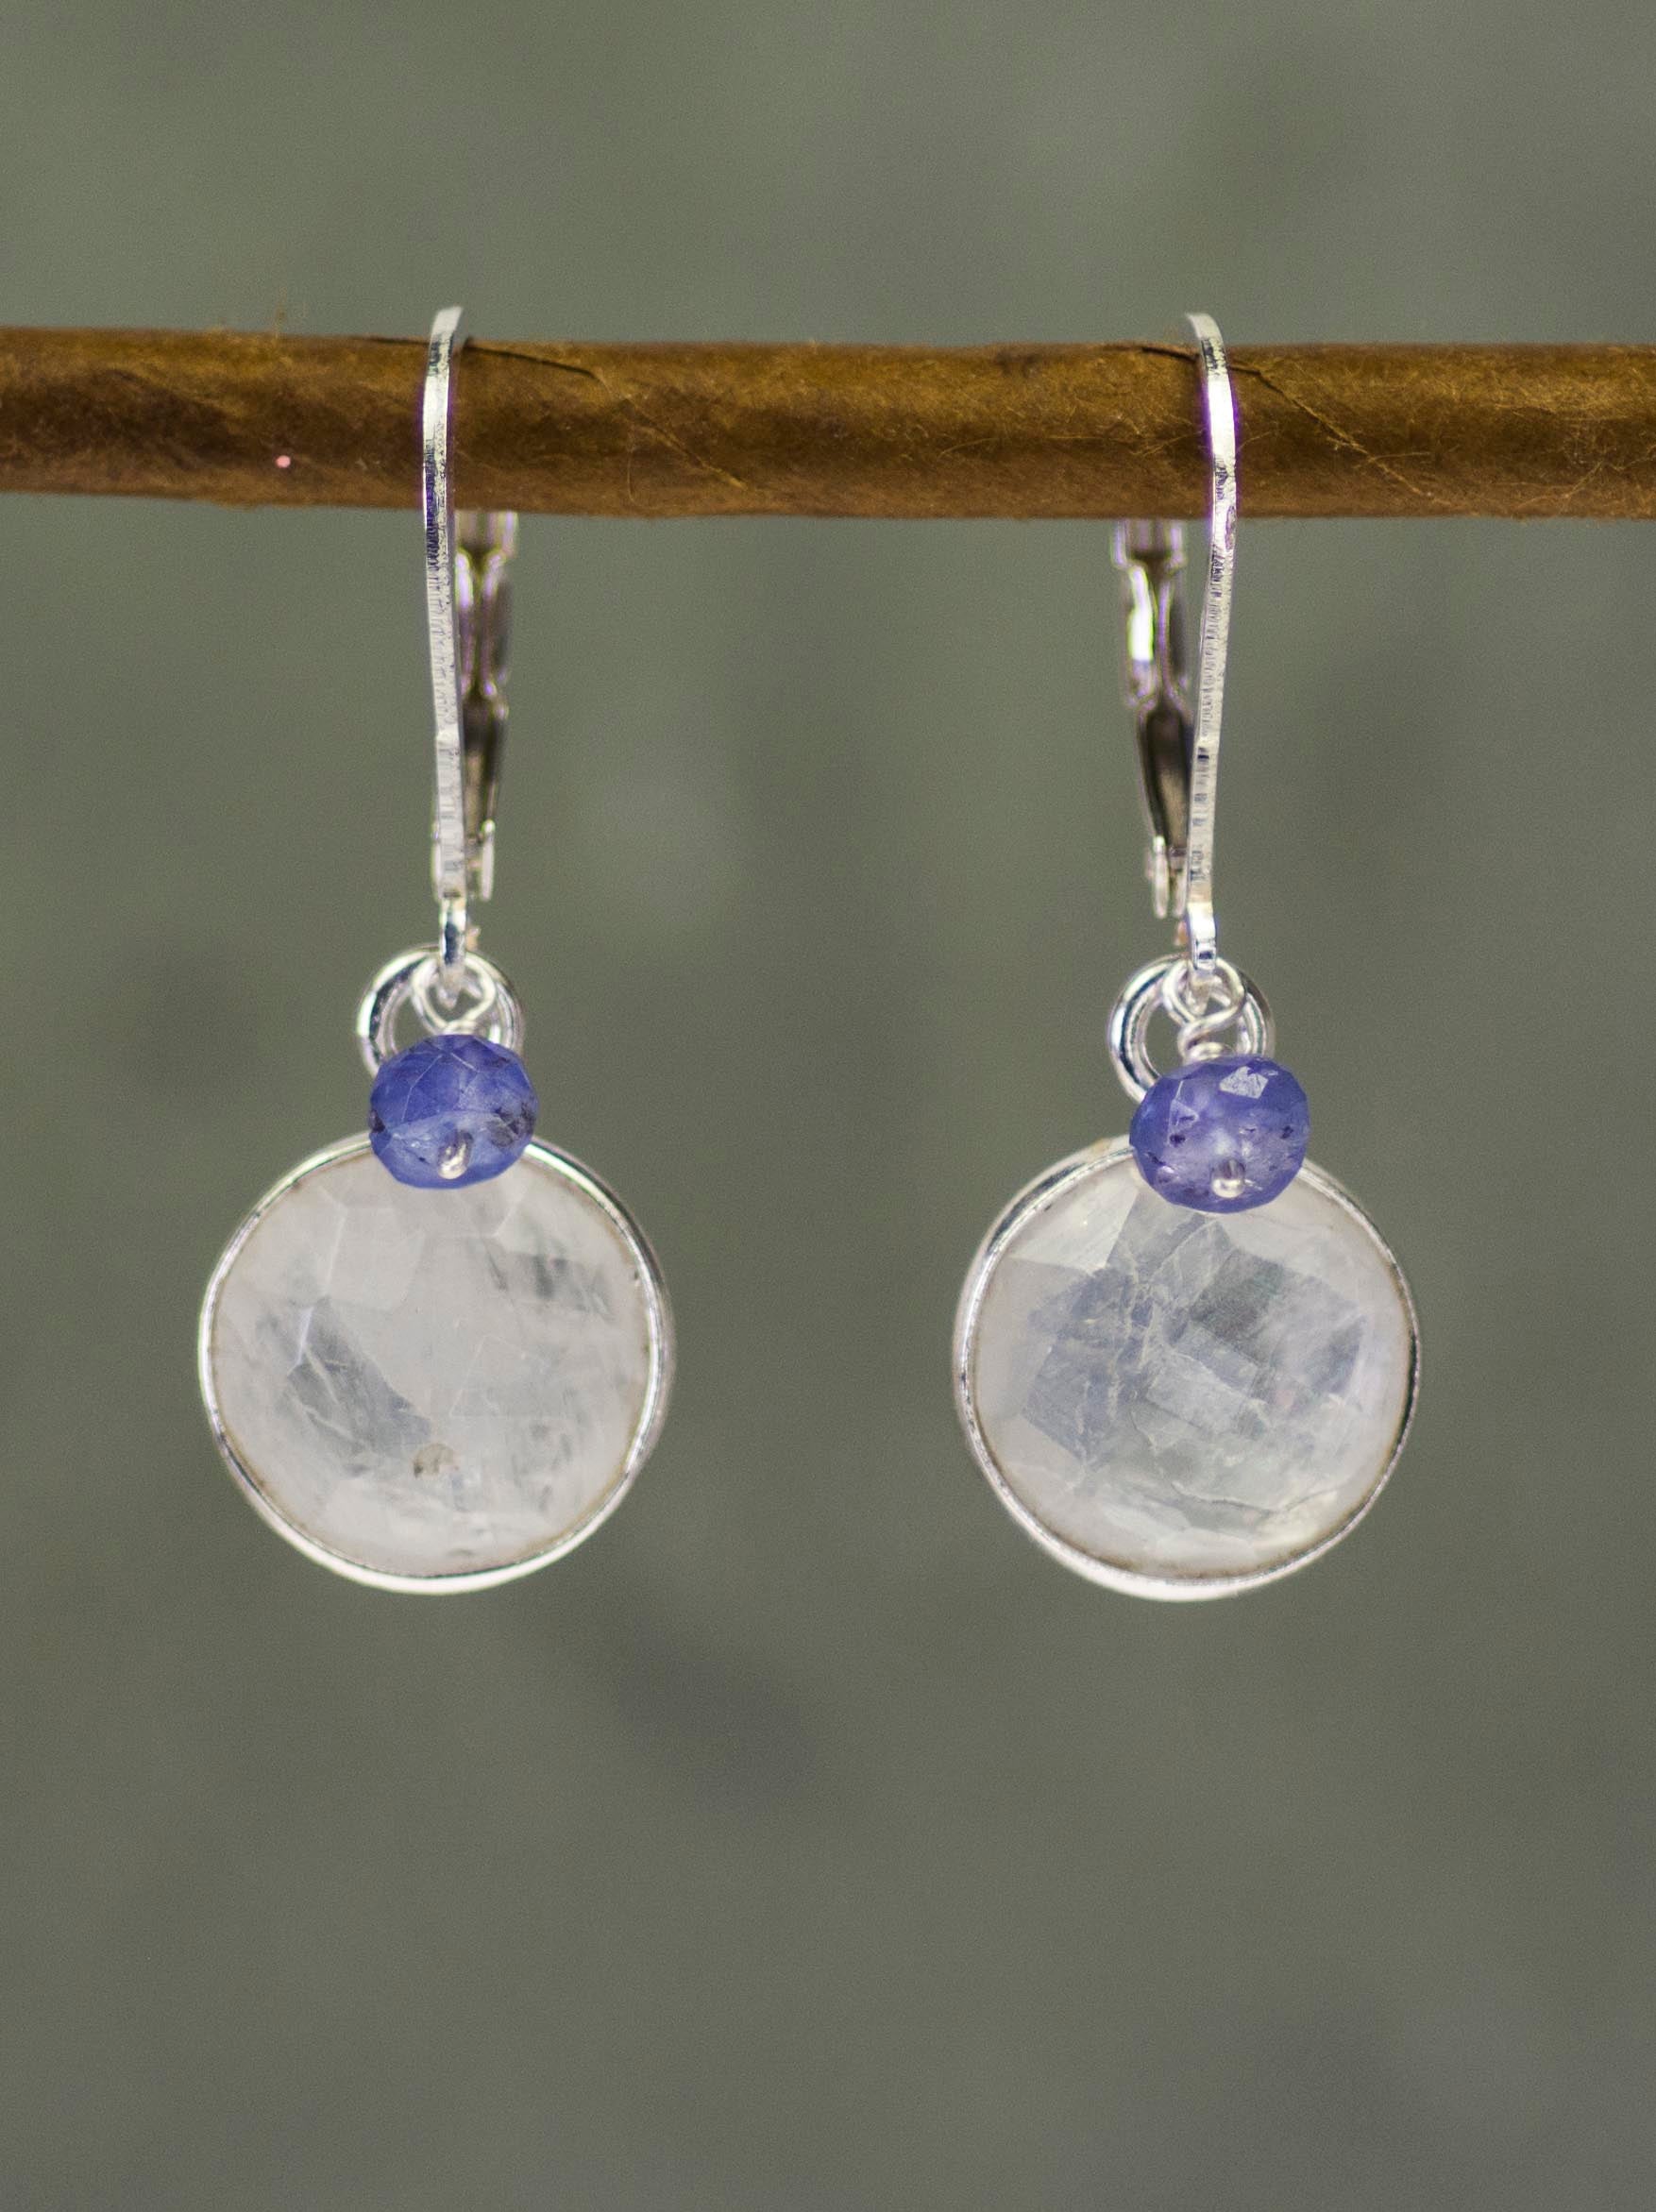 Rainbow Moonstone and Tanzanite Earrings by Kristin Ford